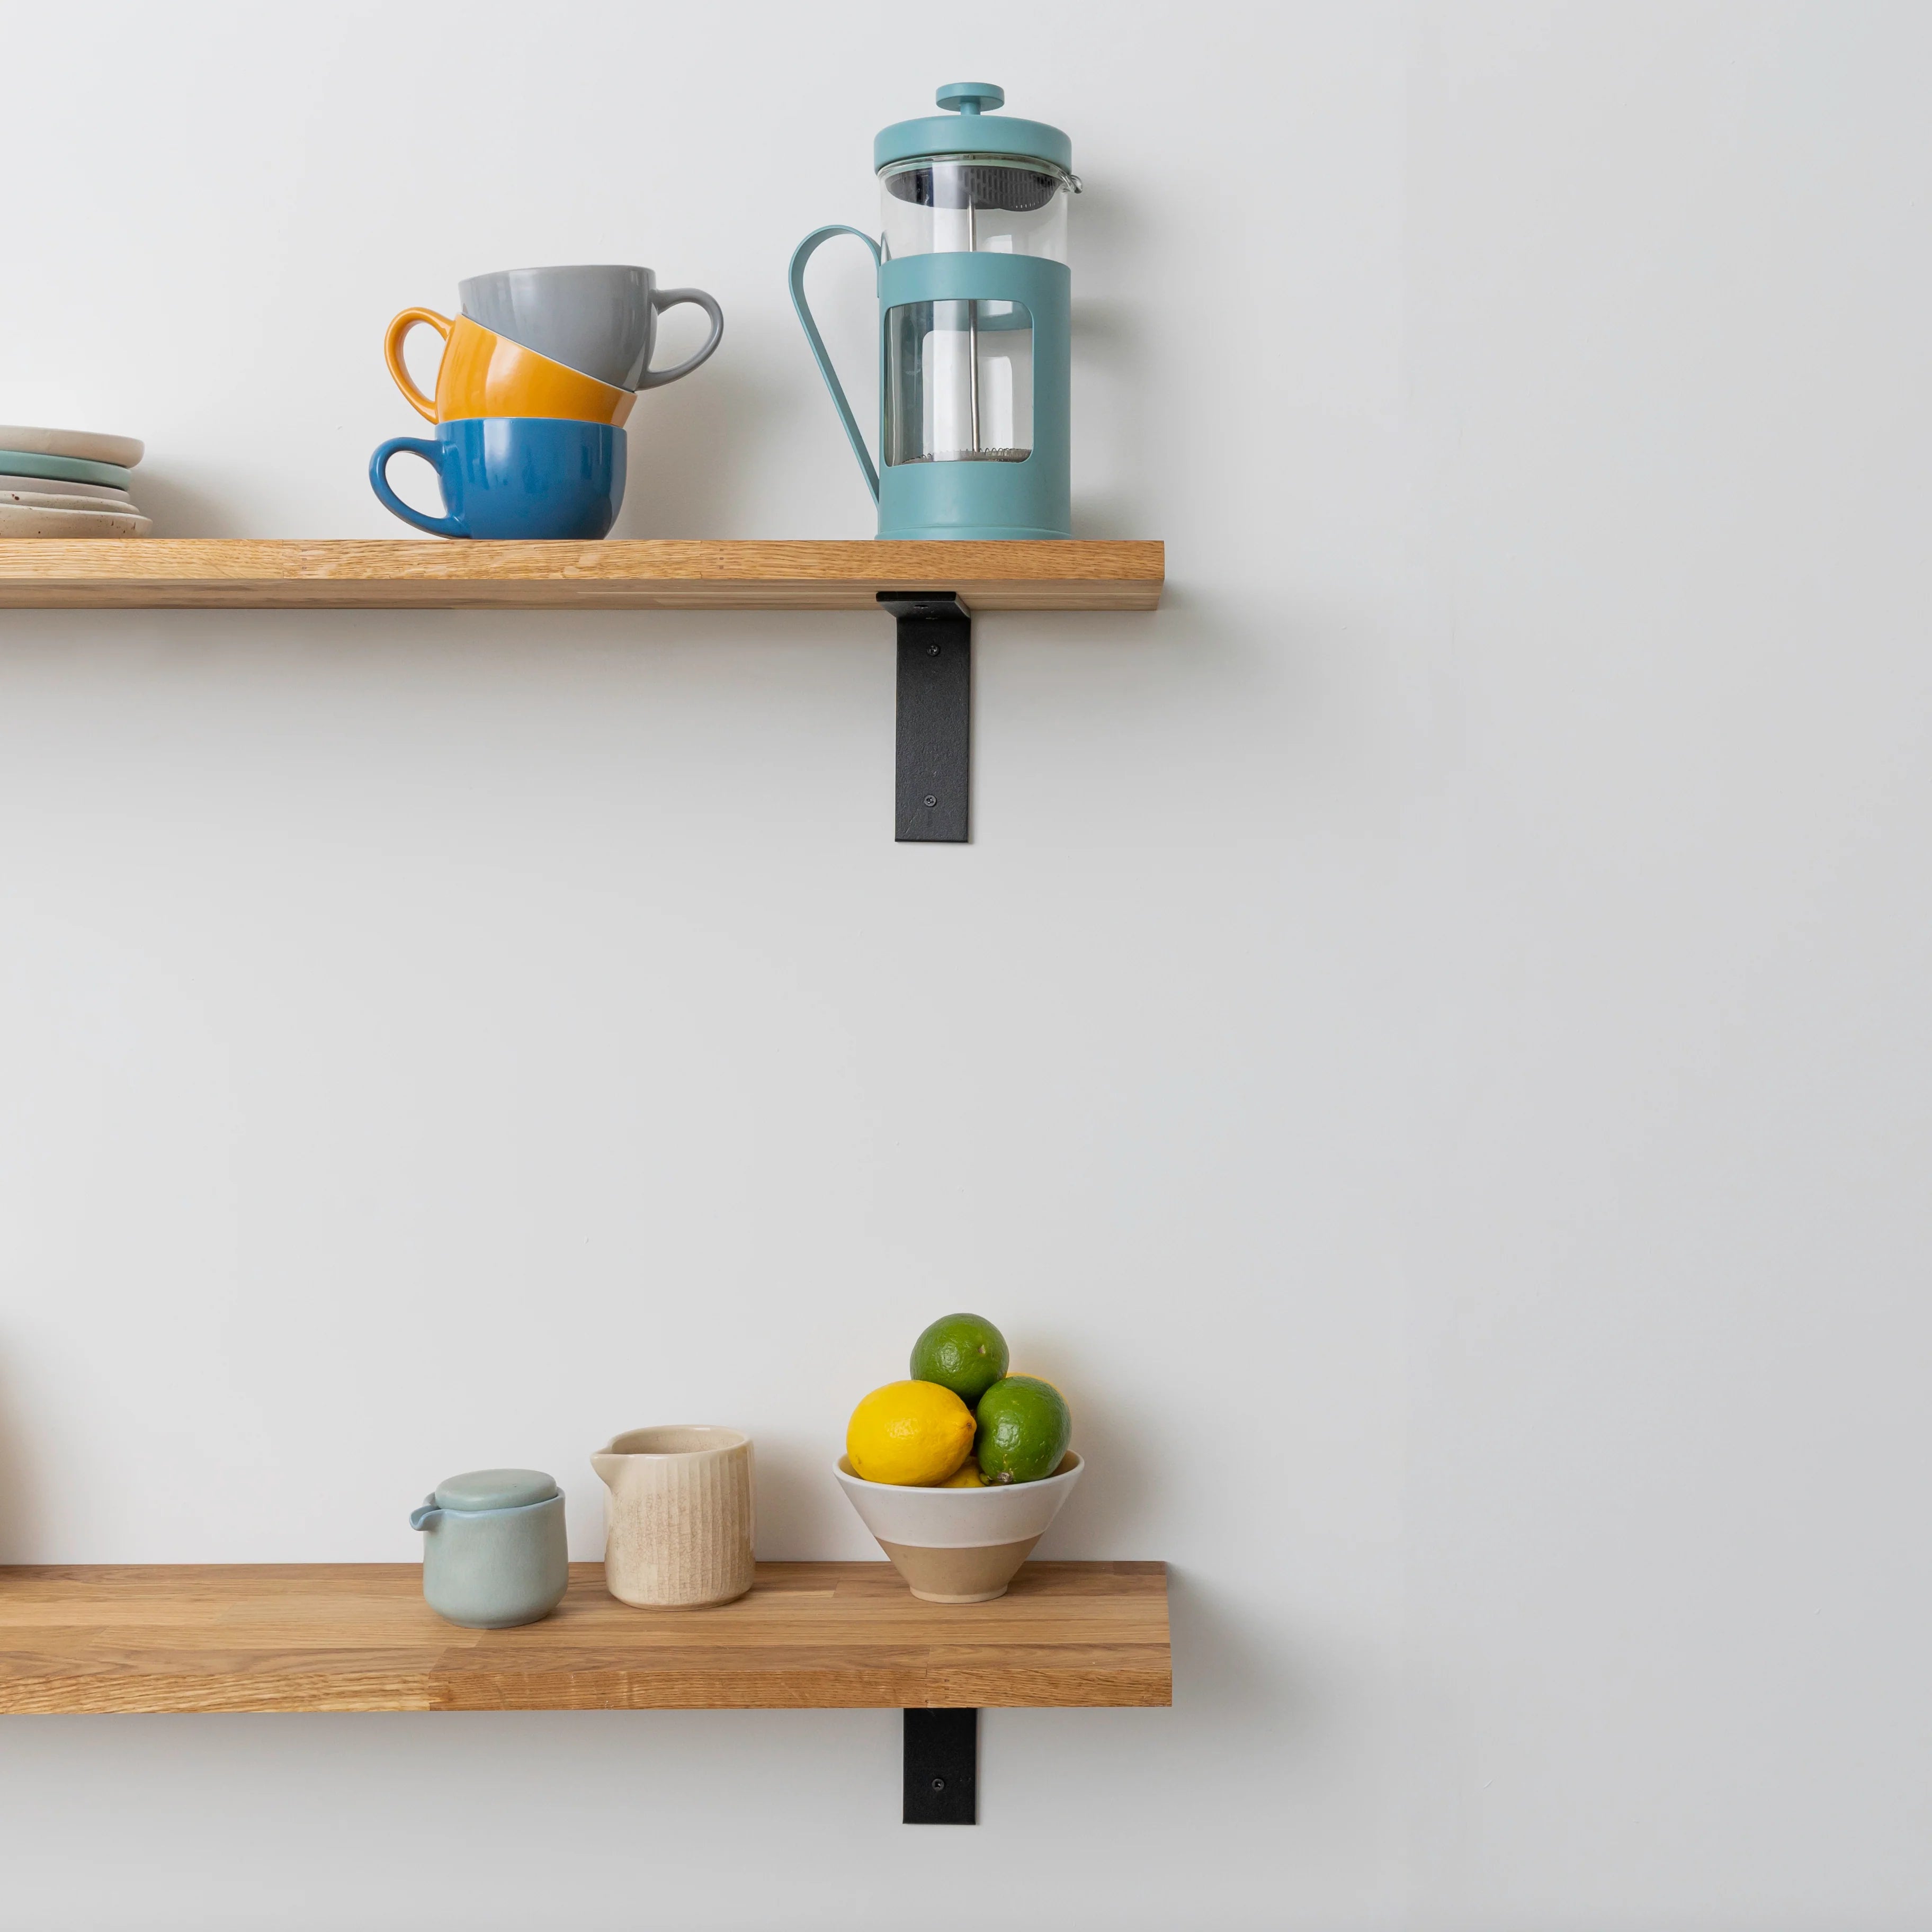 Solid Wood Oak Shelves 18mm with Powder Coated Cast Iron Brackets